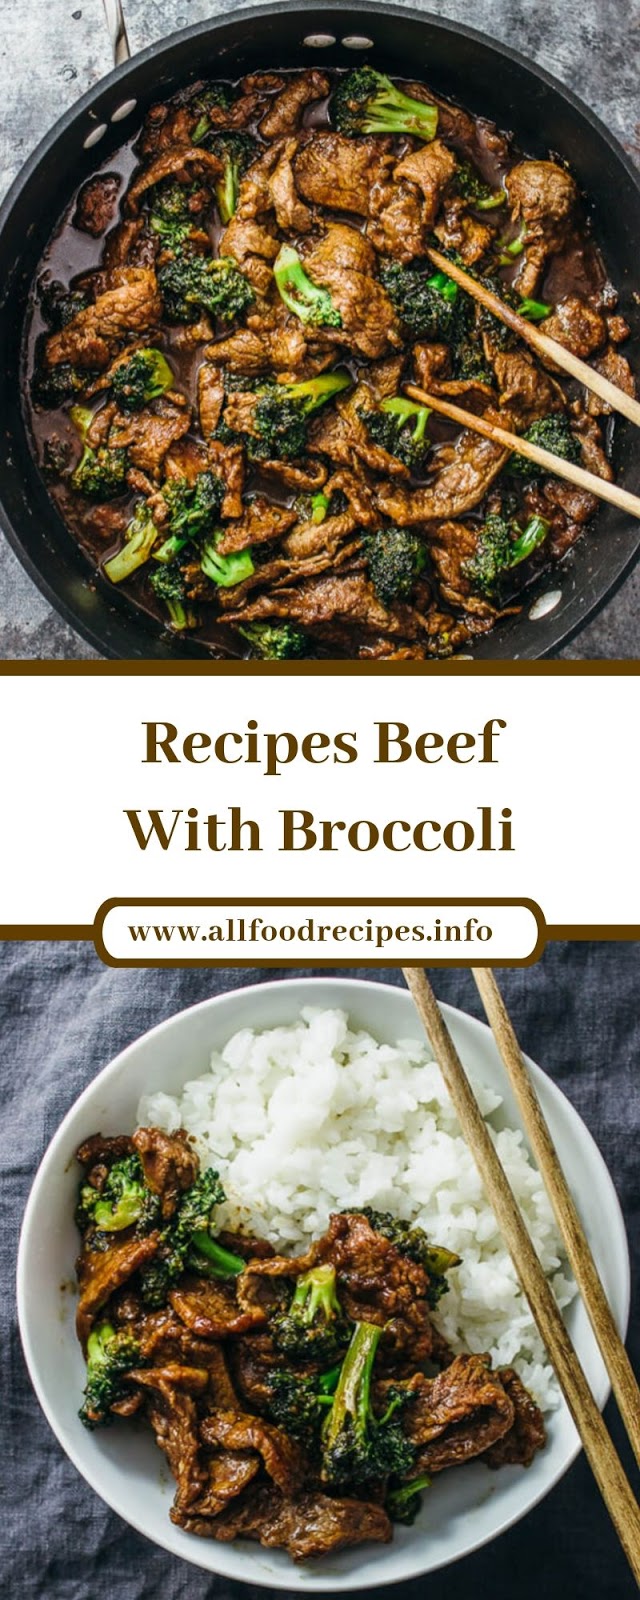 Recipes Beef With Broccoli